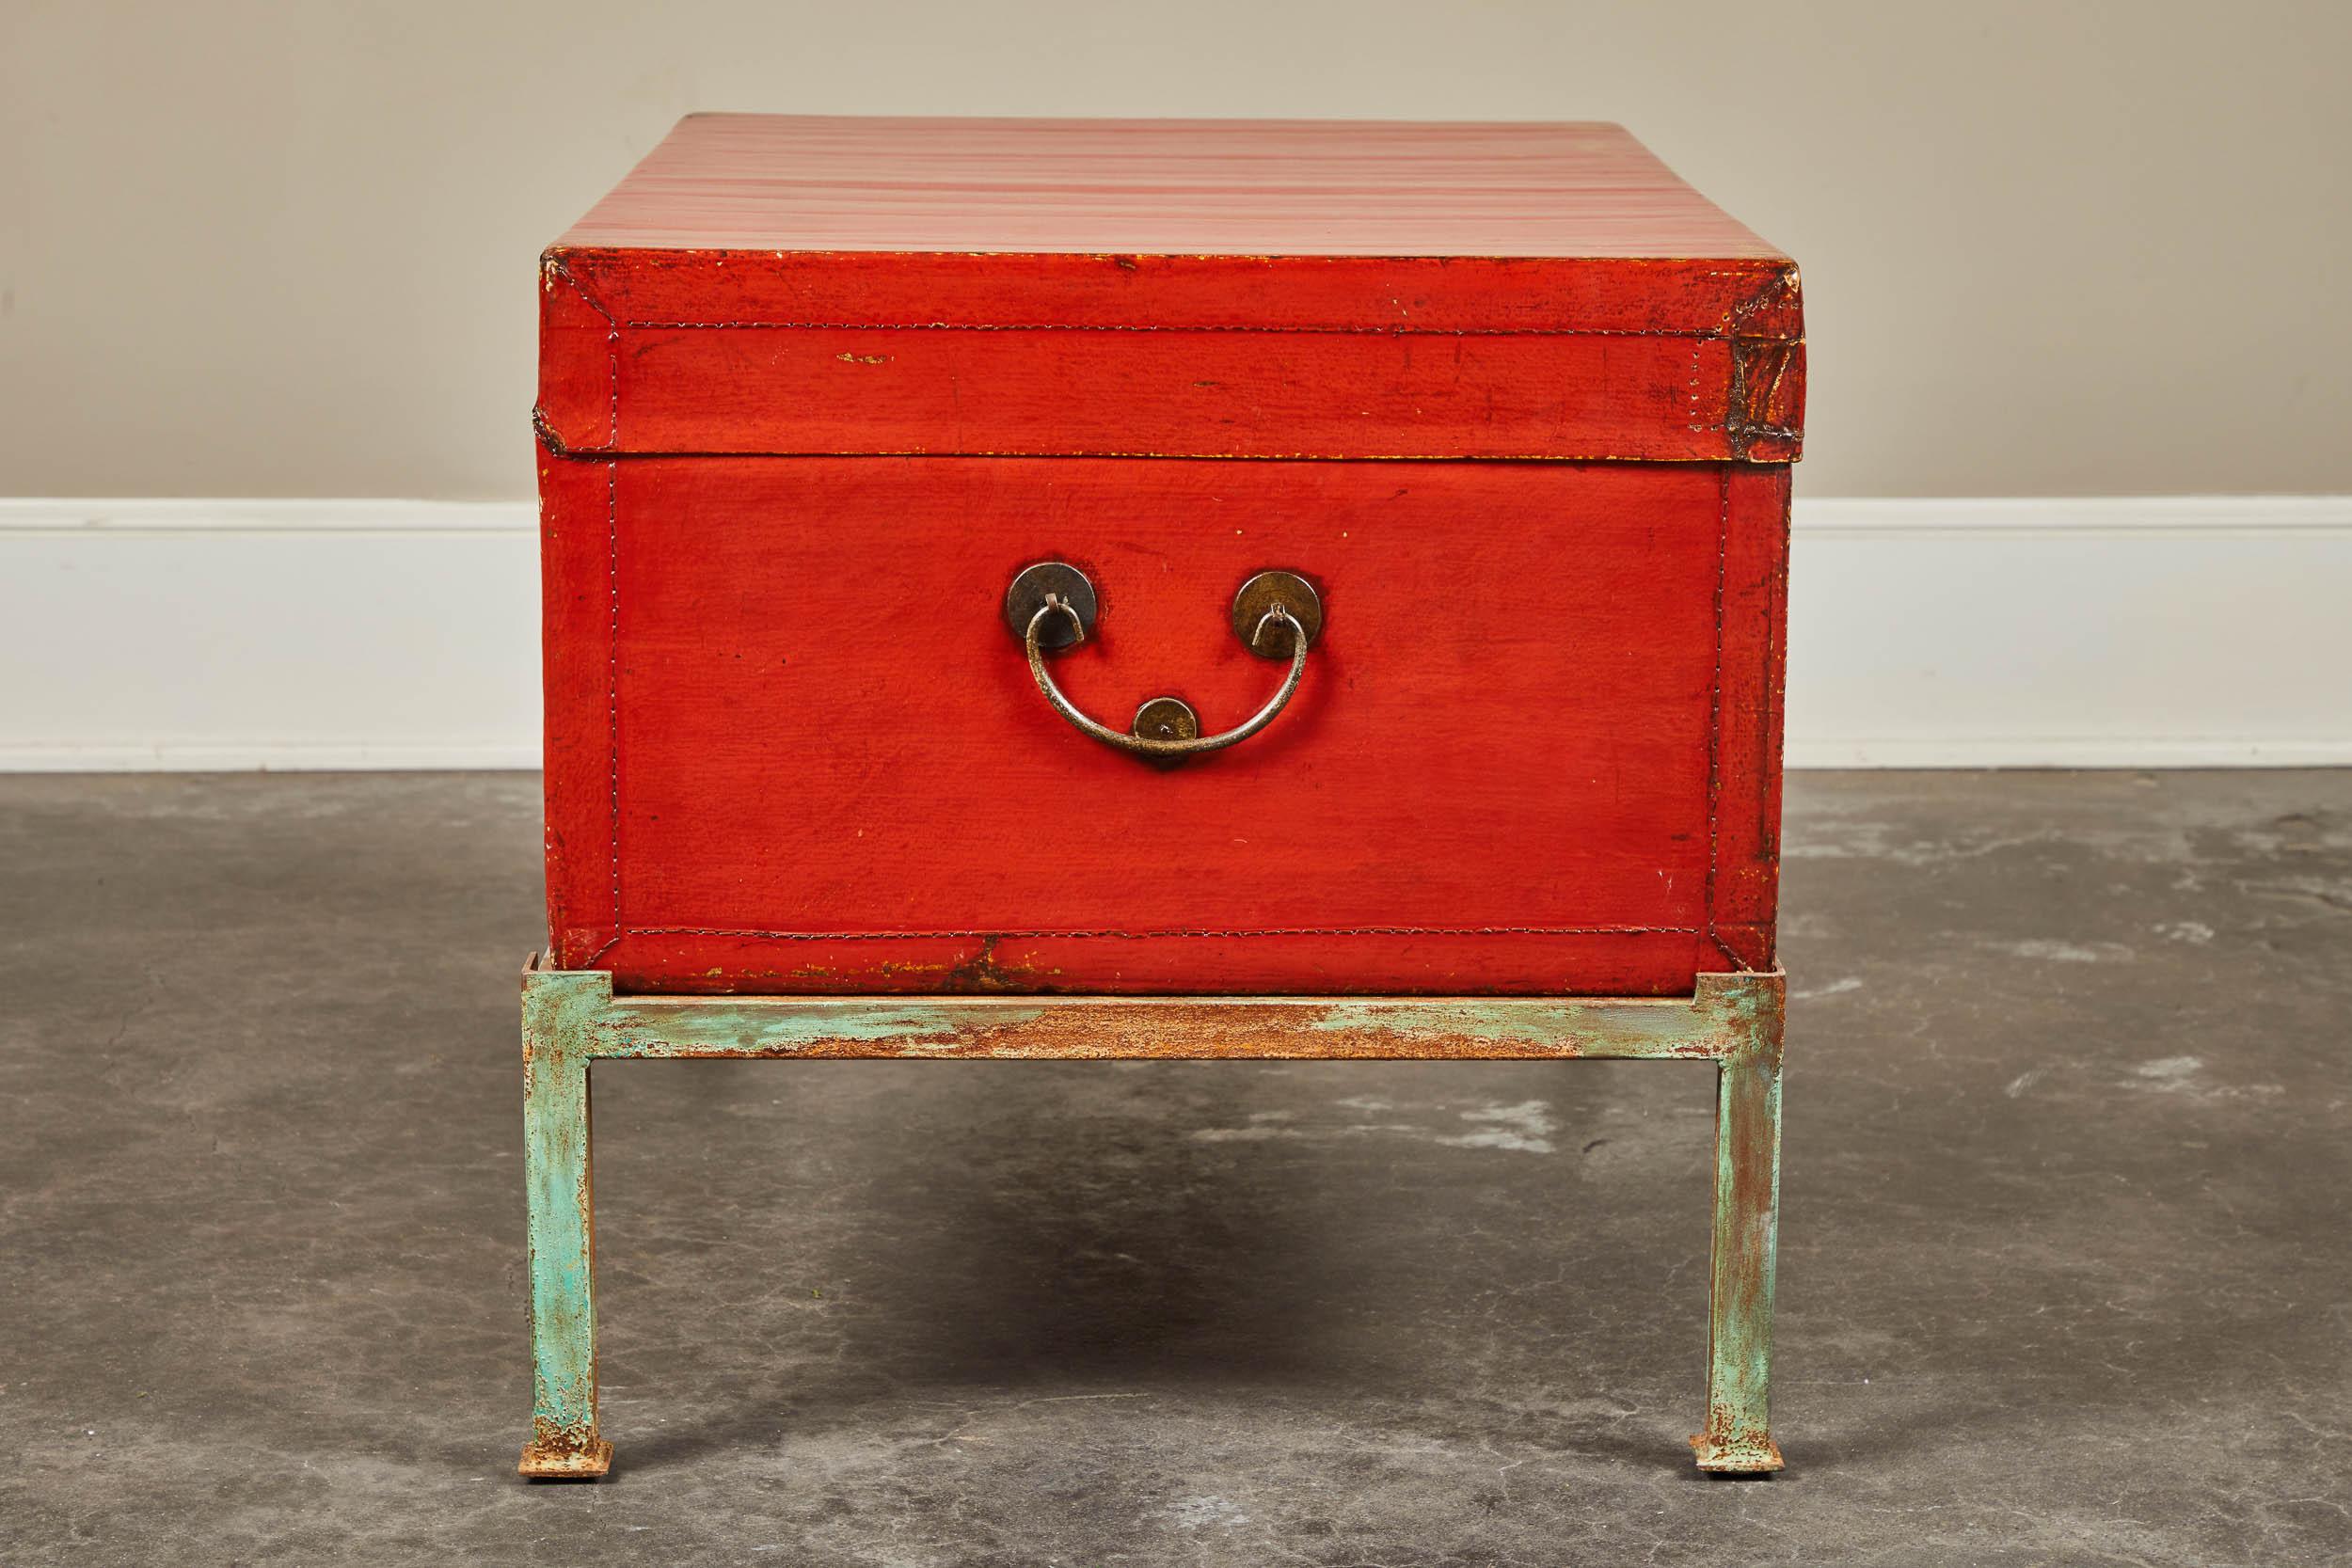 A 19th century pig-skin leather camphor trunk on newer stand. Red lacquer finish with front latch and side handles.